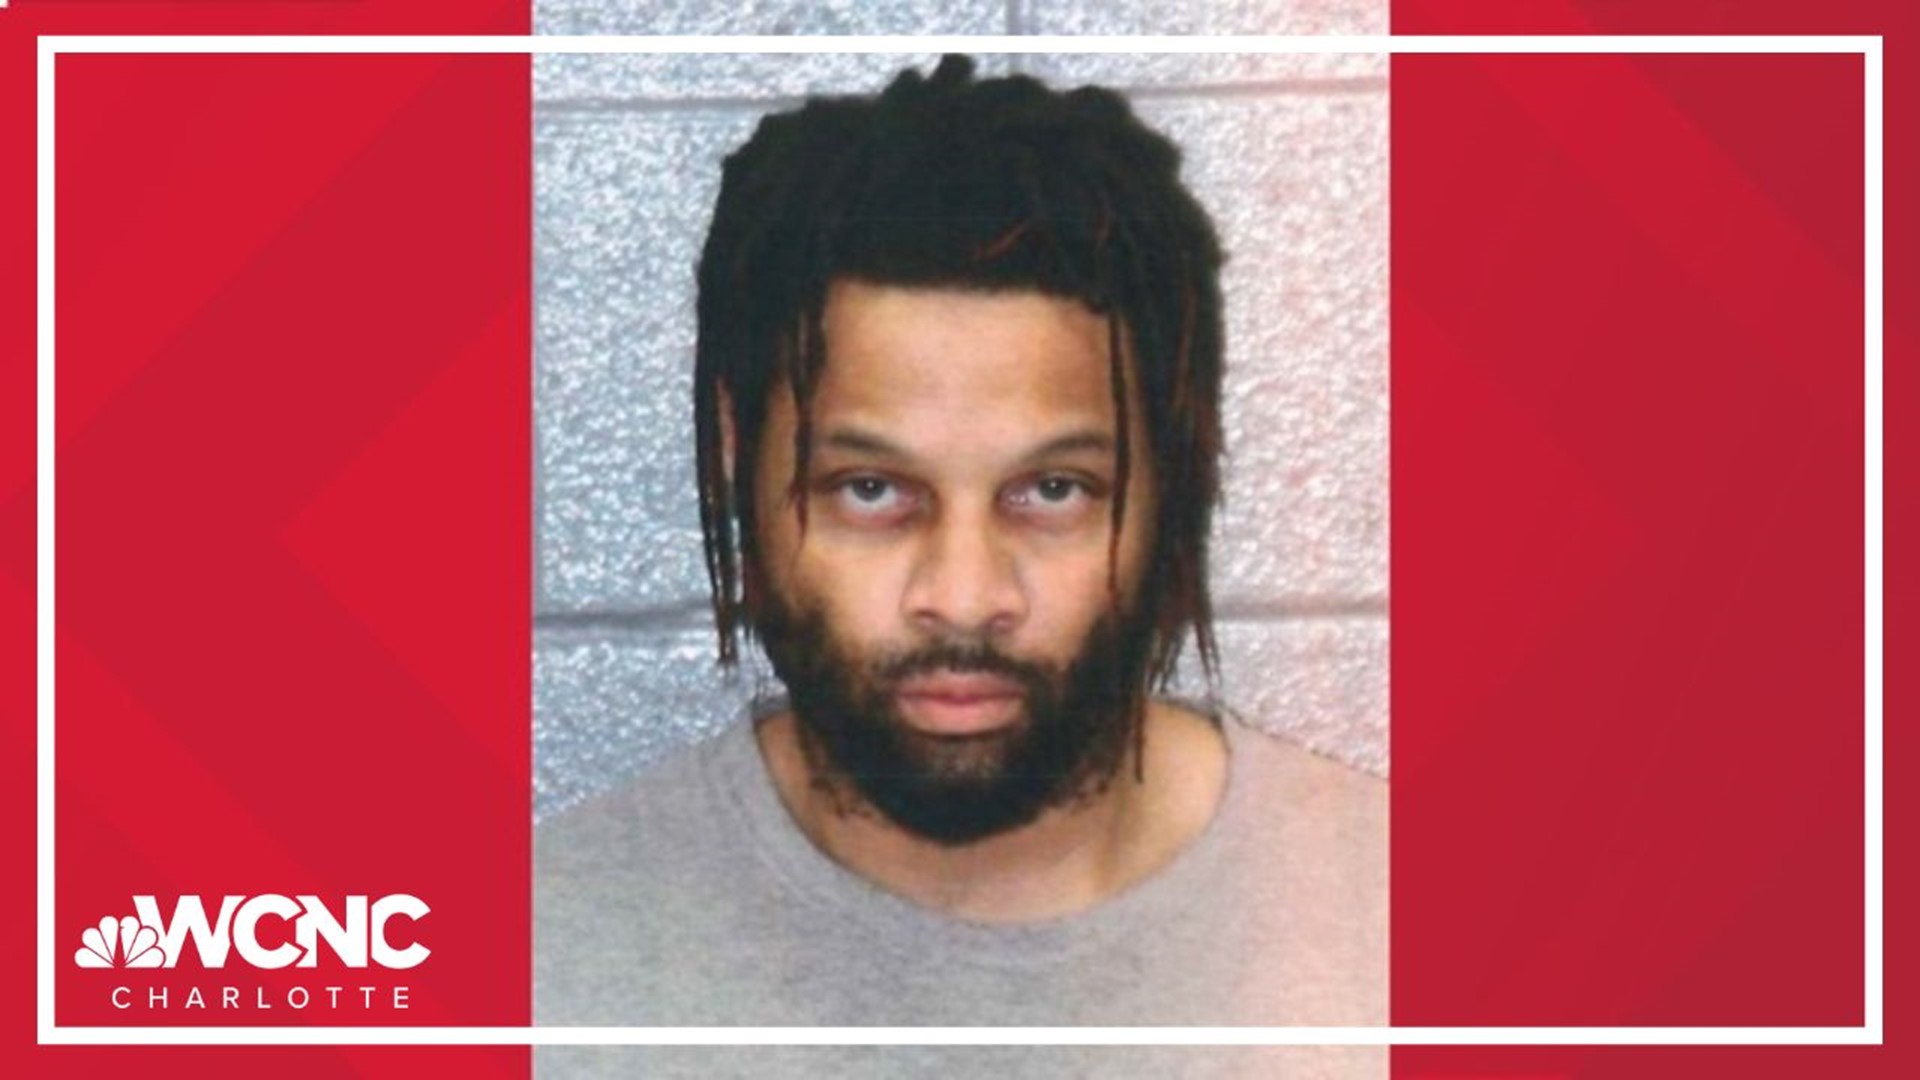 Benjamin Taylor is facing three counts of first-degree murder in connection with the killings of Markayla Johnson and her two young children.